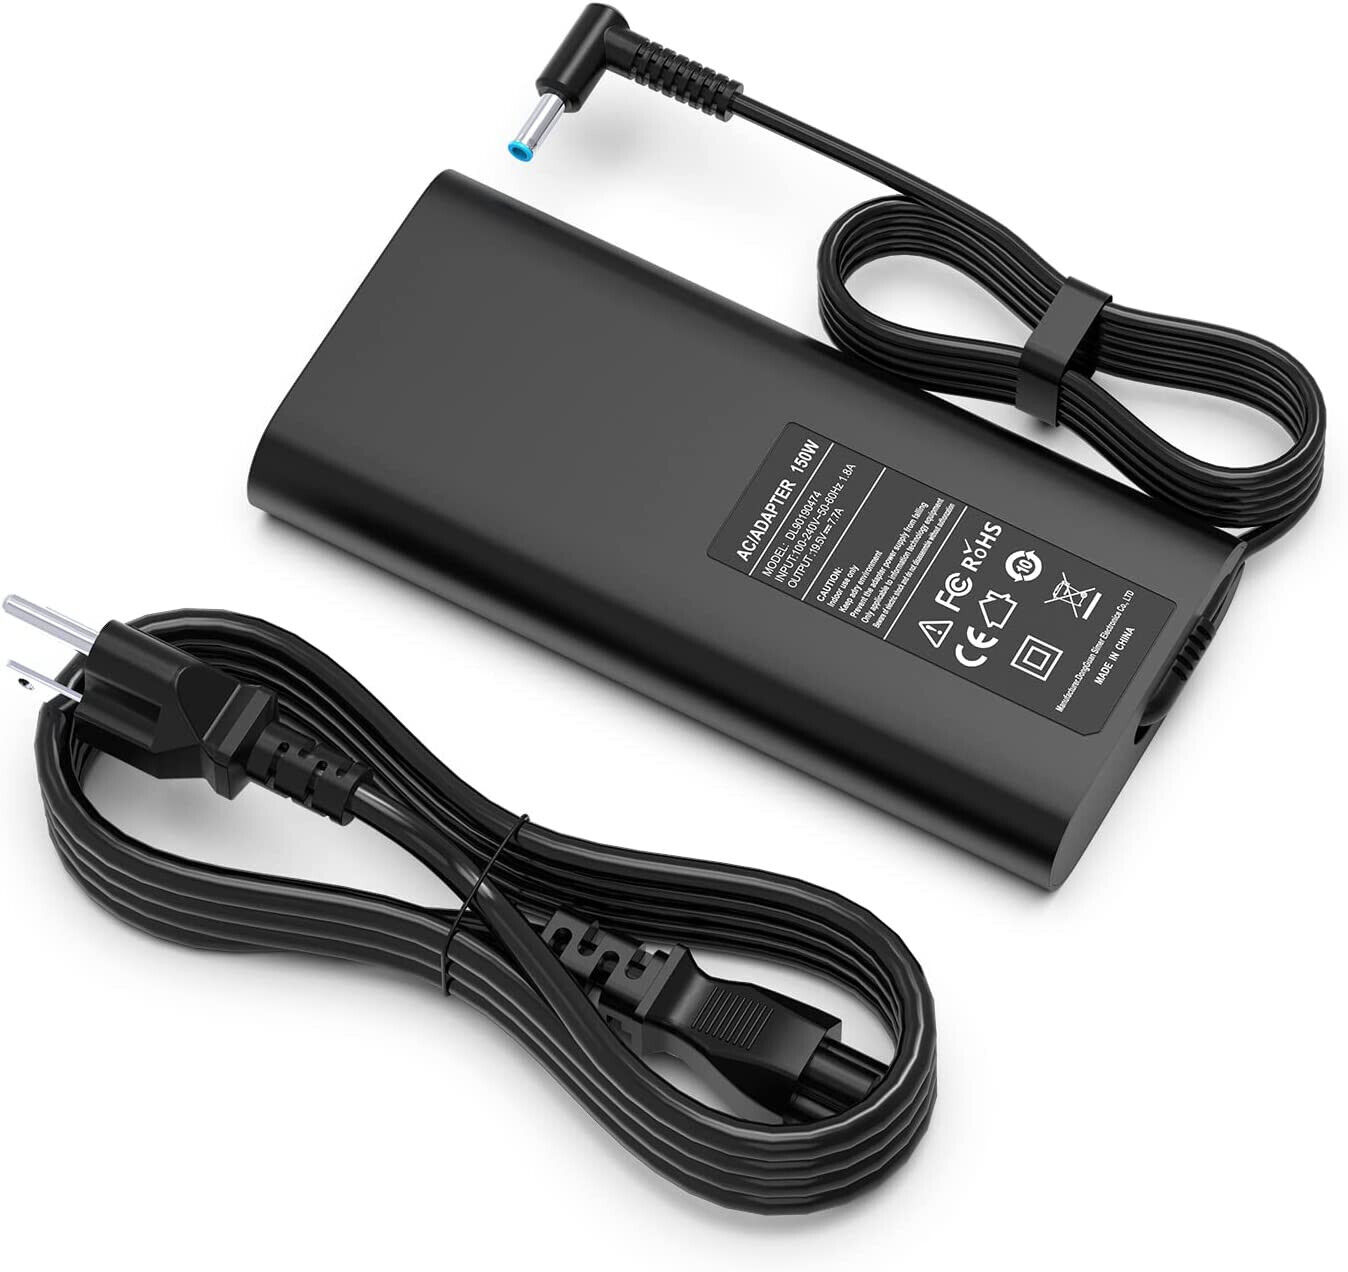 150W AC Adapter Charger Fit for HP ZBook 15 16 17 15U 15V G3 G4 G5 G6 G7 G8 G9